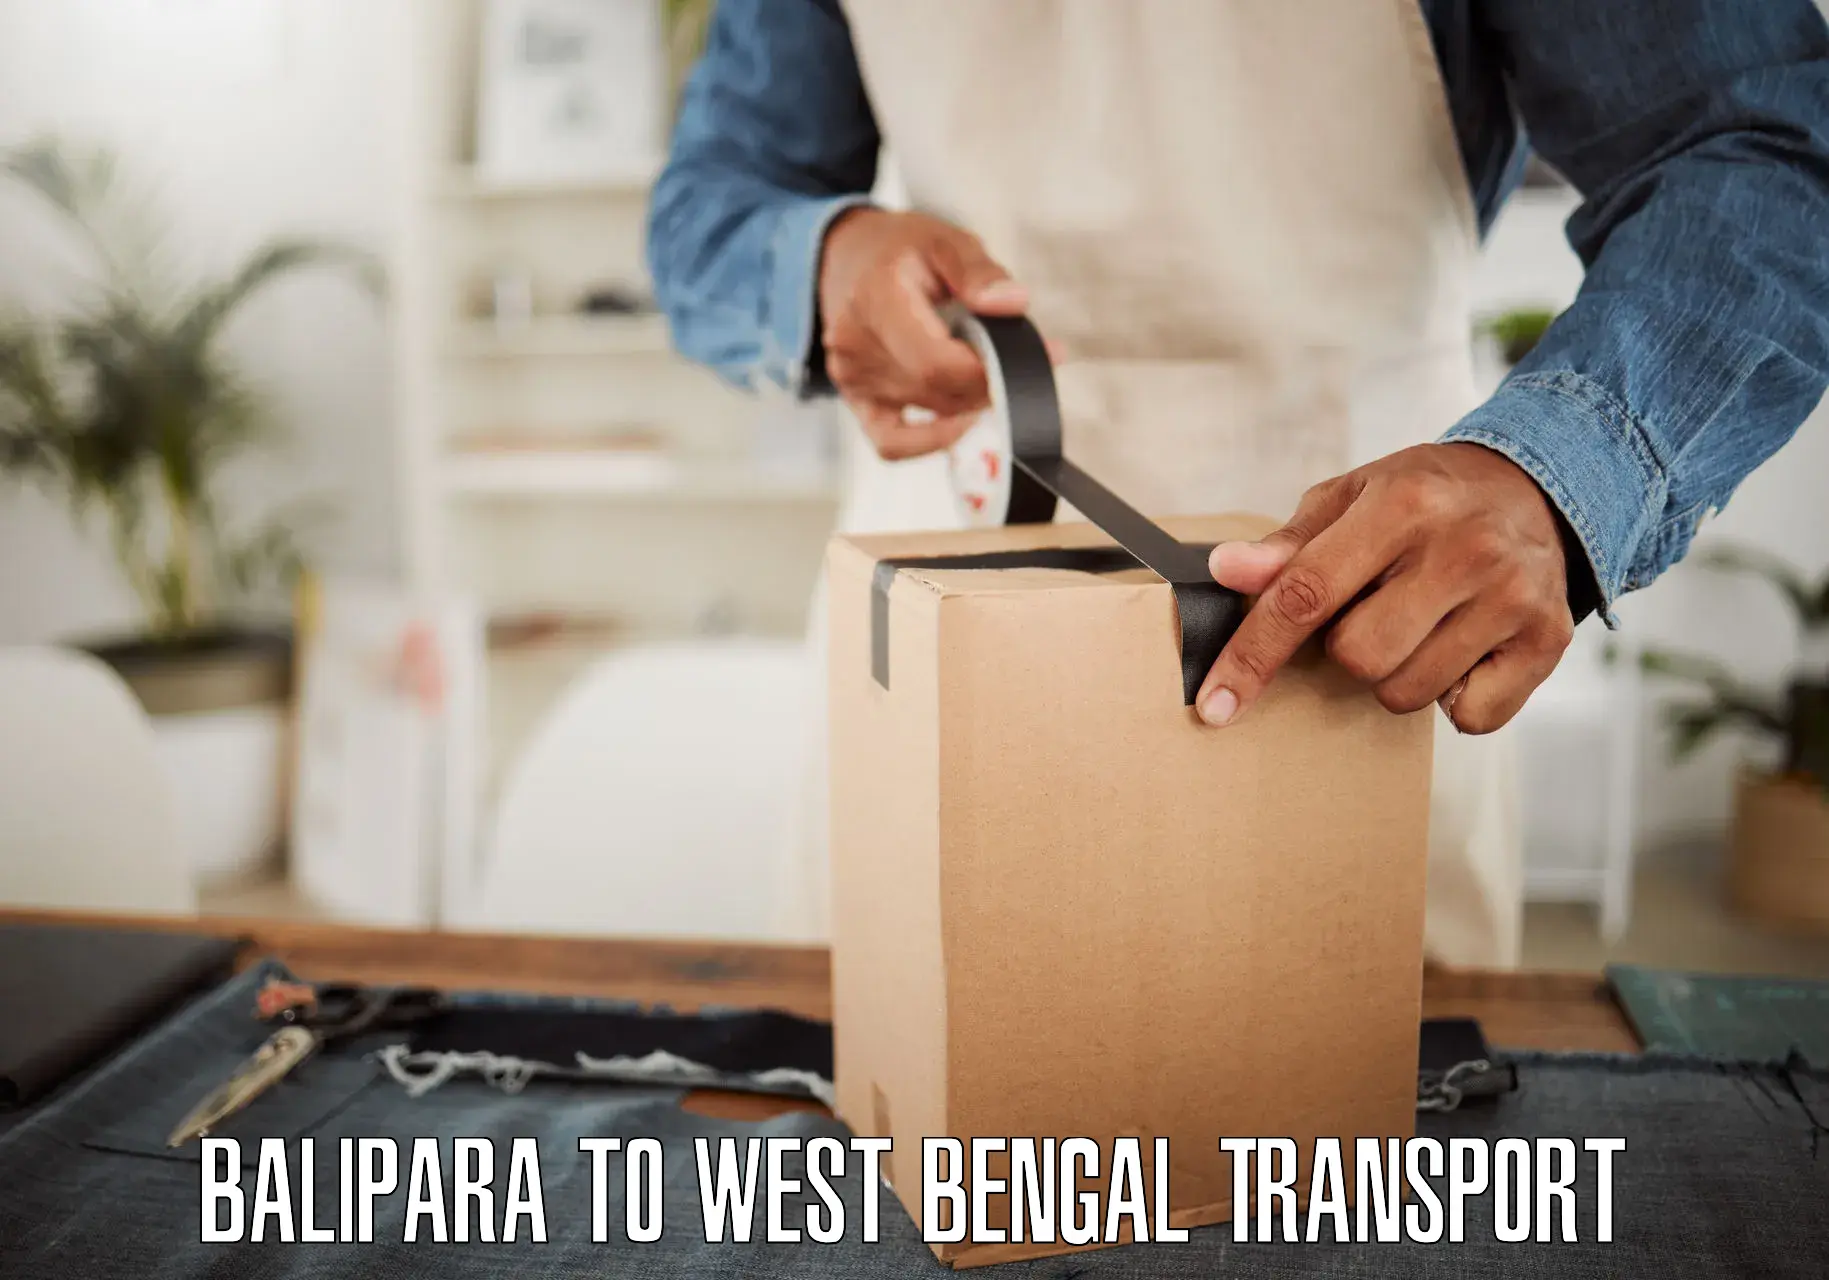 Container transport service Balipara to Barrackpore